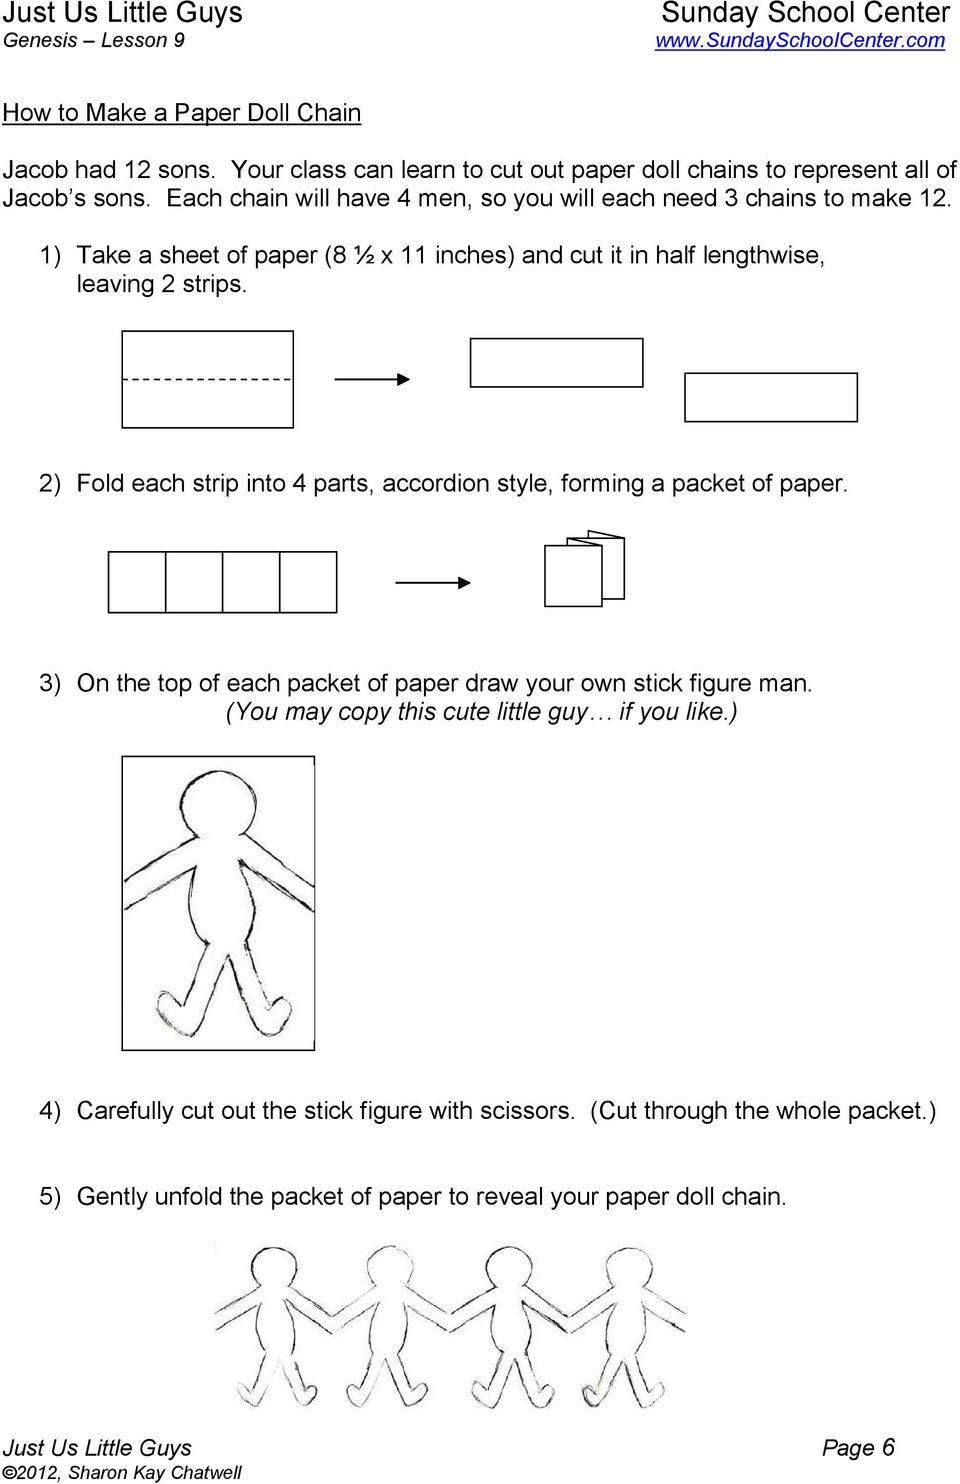 2) Fold each strip into 4 parts, accordion style, forming a packet of paper. 3) On the top of each packet of paper draw your own stick figure man.